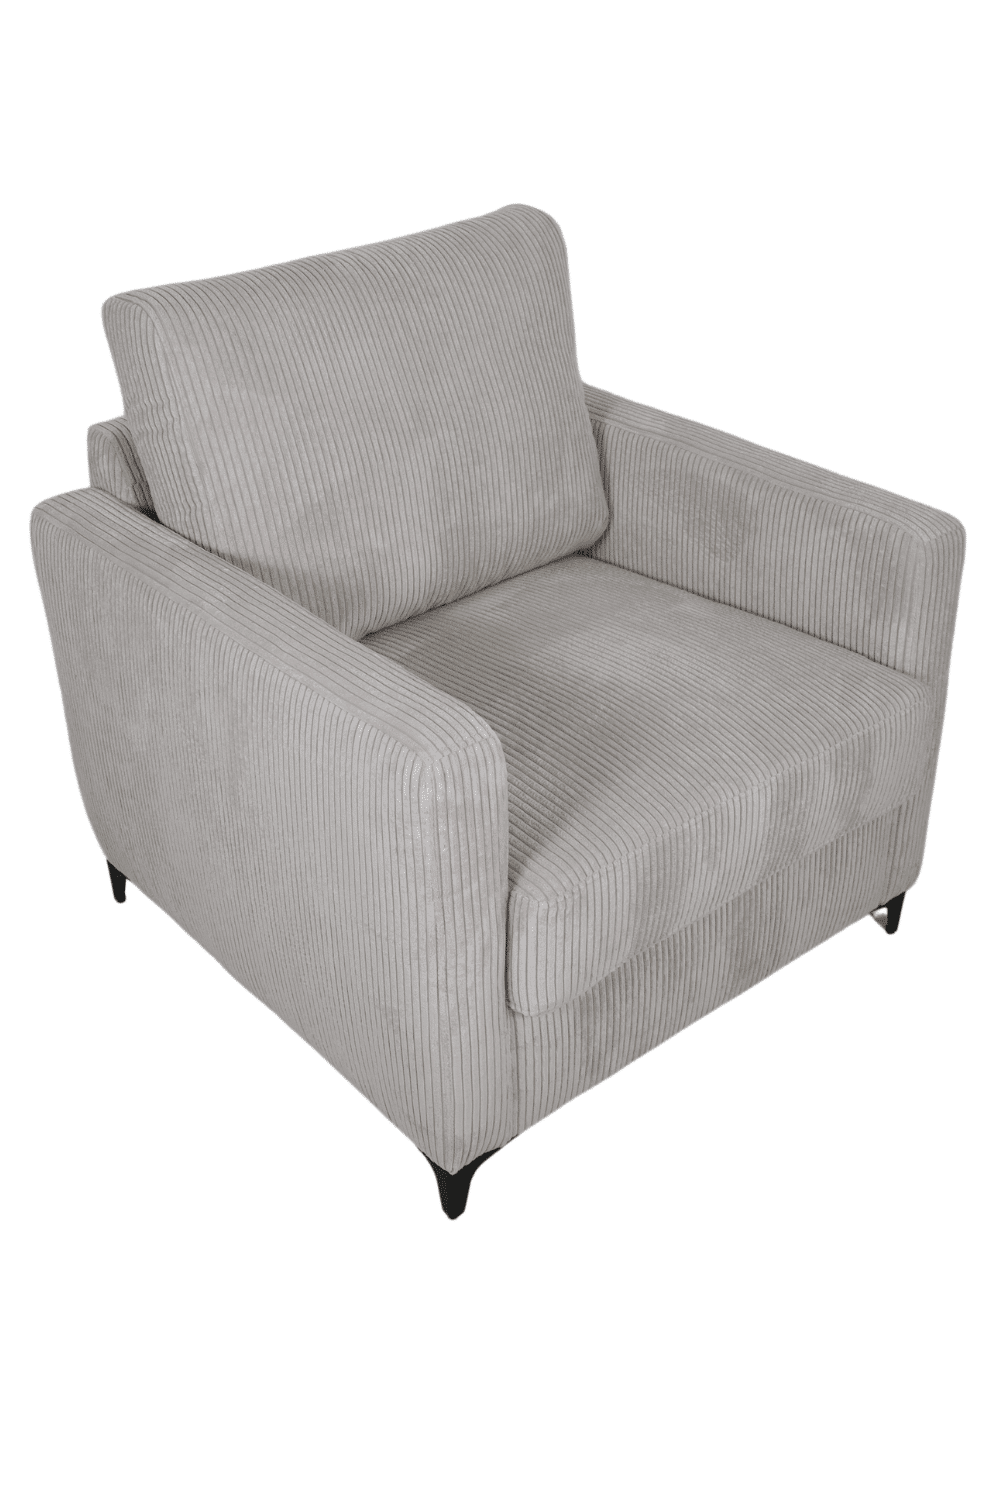 grote fauteuil ribstof